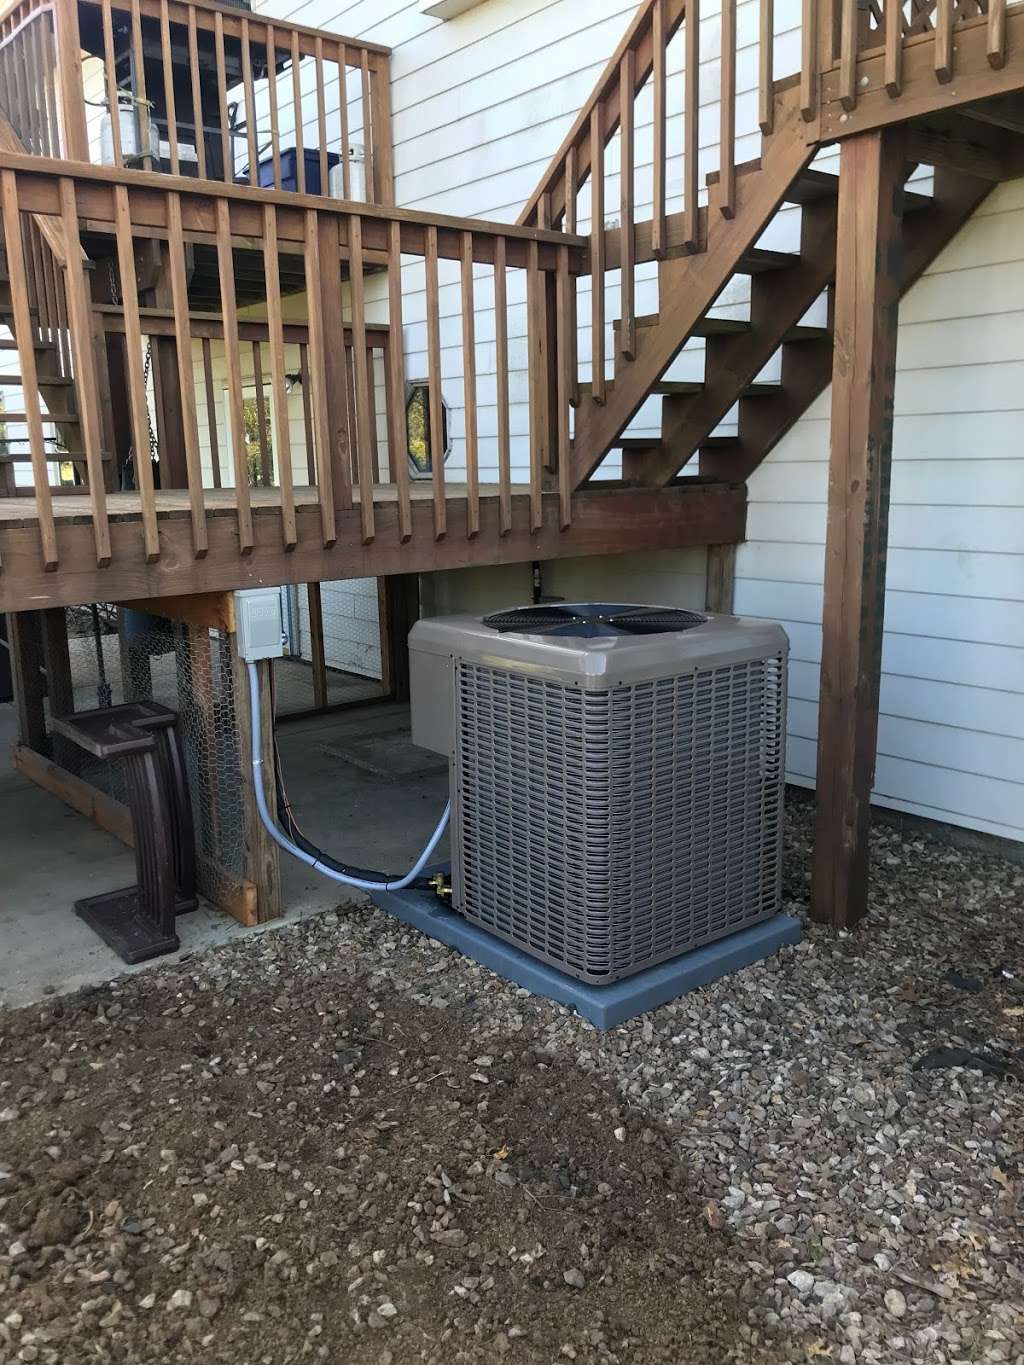 Complete Heating & Air Conditioning | 18985 178th St, Tonganoxie, KS 66086 | Phone: (913) 207-5170